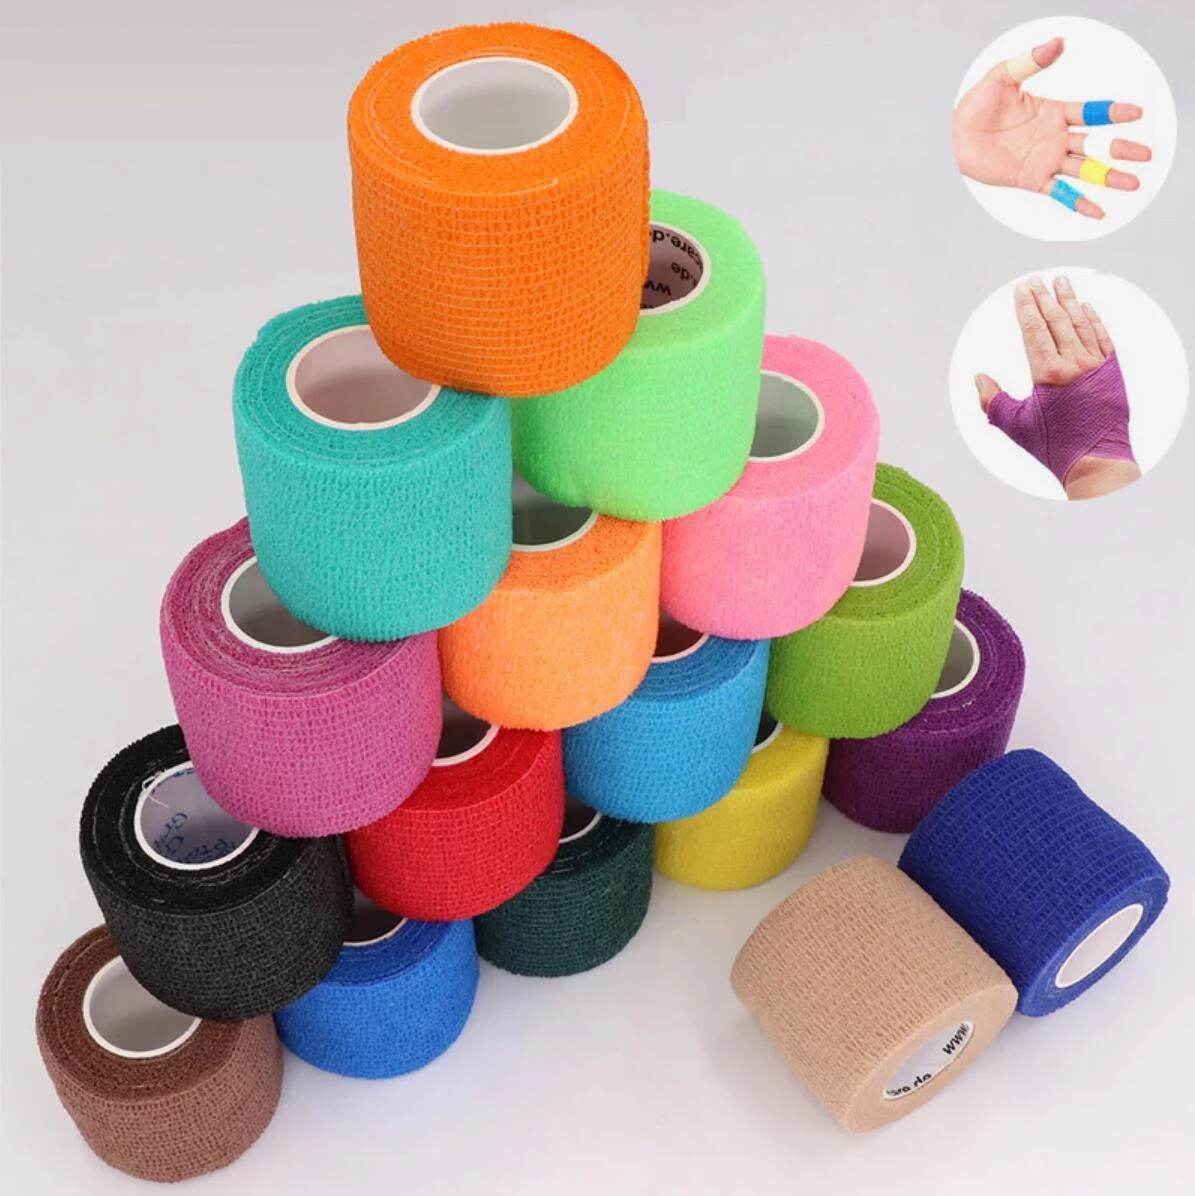 

Colorful Sport Elastic Wrap Tape Self Adhesive Bandage 4.5m Elastoplast For Knee Support Pads Finger Ankle Palm Shoulder, Customized